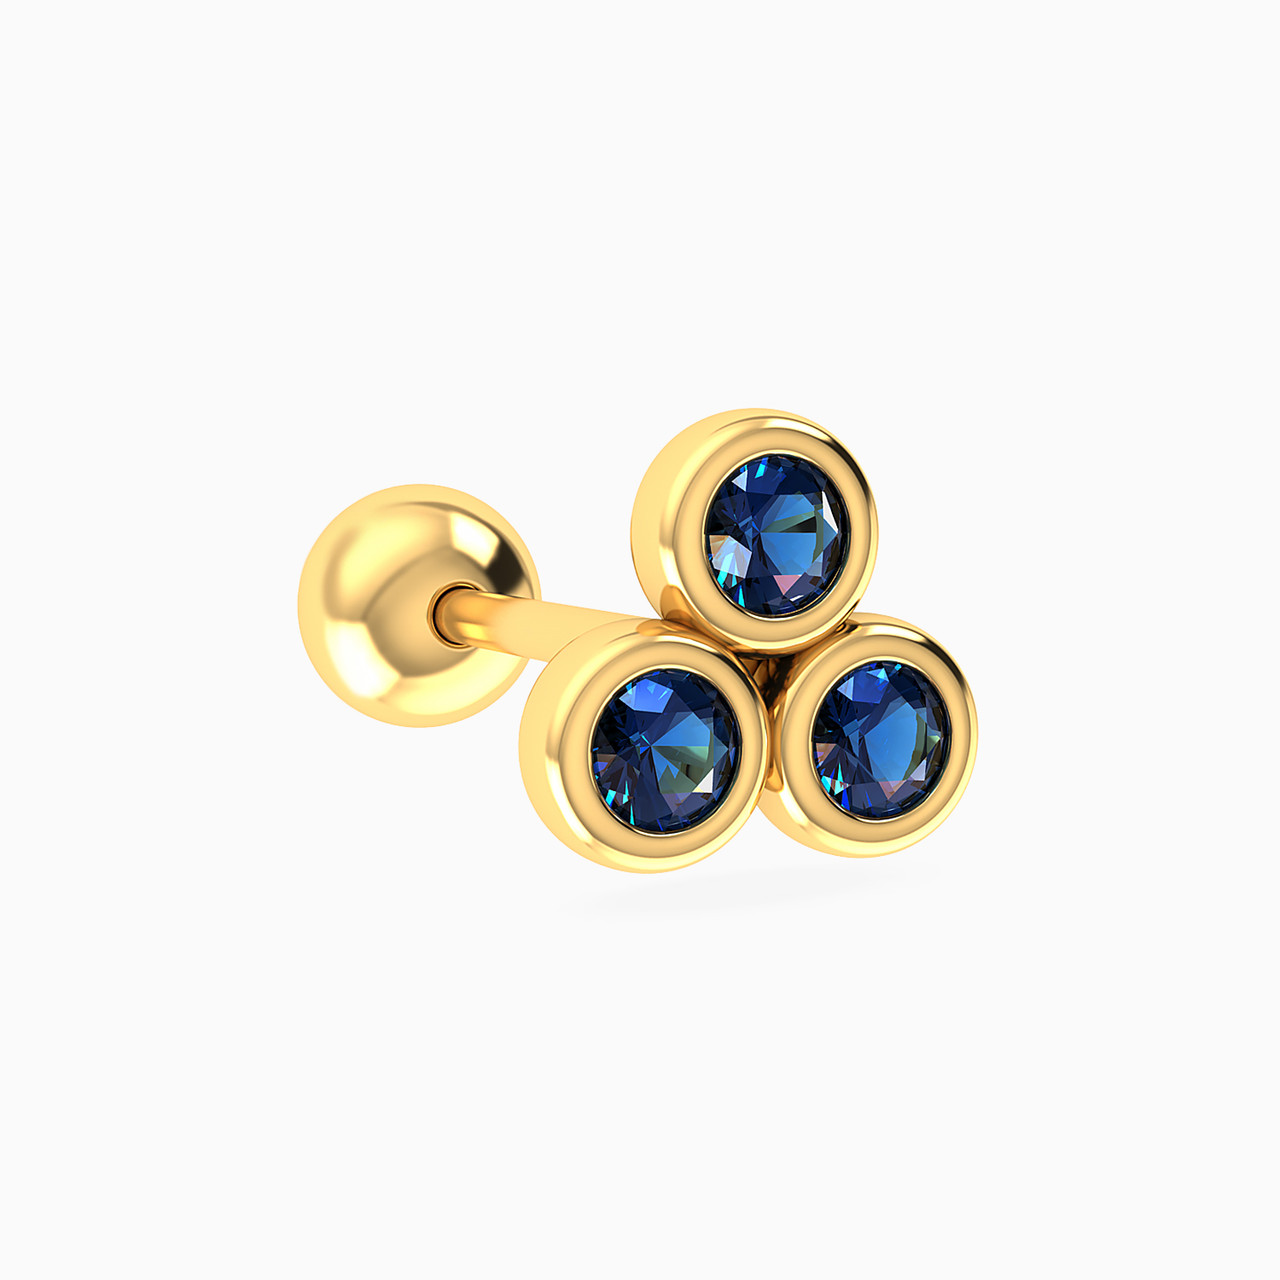 Round Shaped Colored Stone Stud Earring in 18K Gold